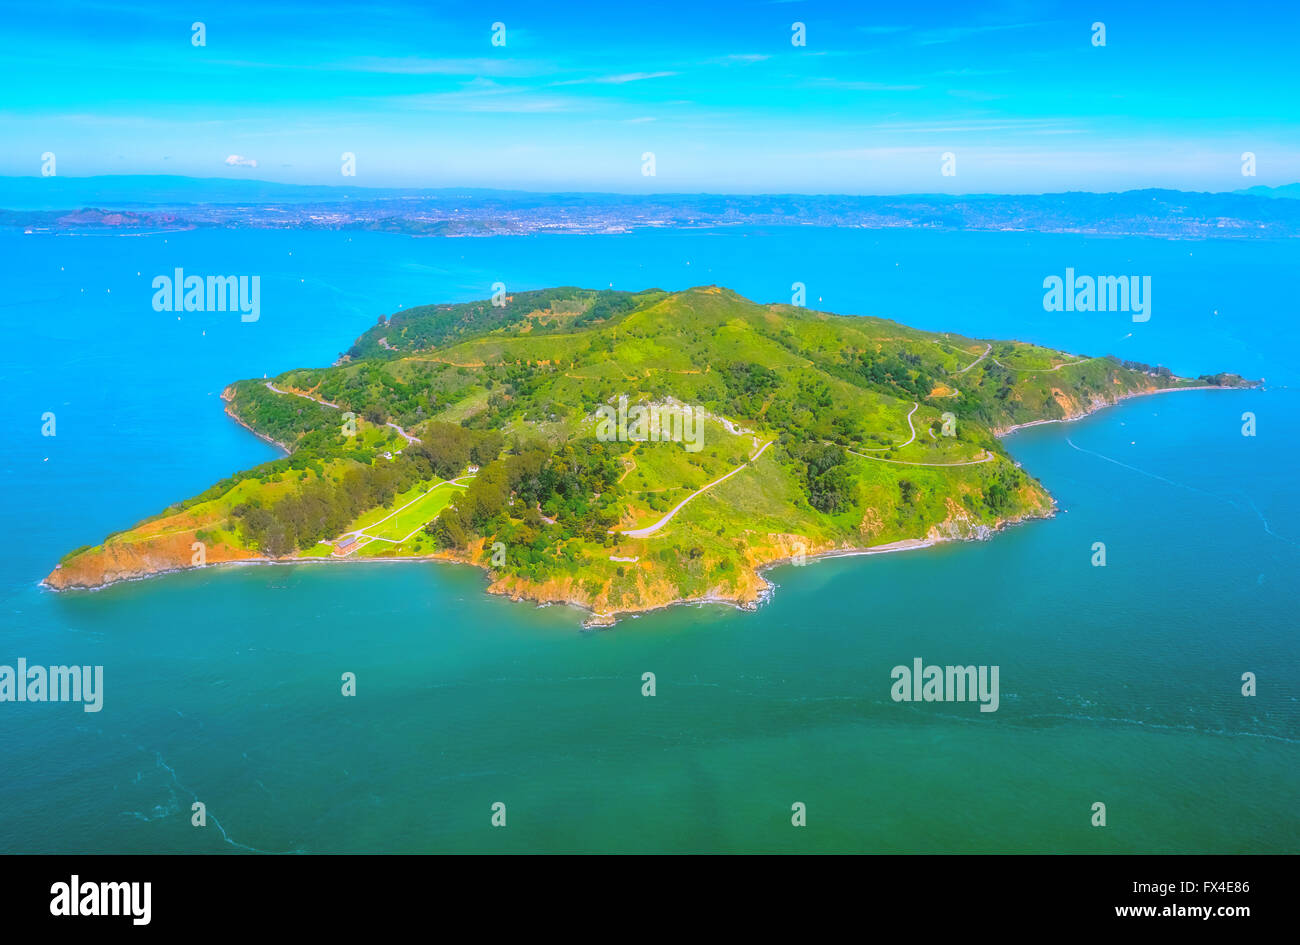 Aerial view, fishing Iceland, Ayala Cove, car-free island in front of Belvedere Tiburon, San Francisco Bay Area, United States Stock Photo